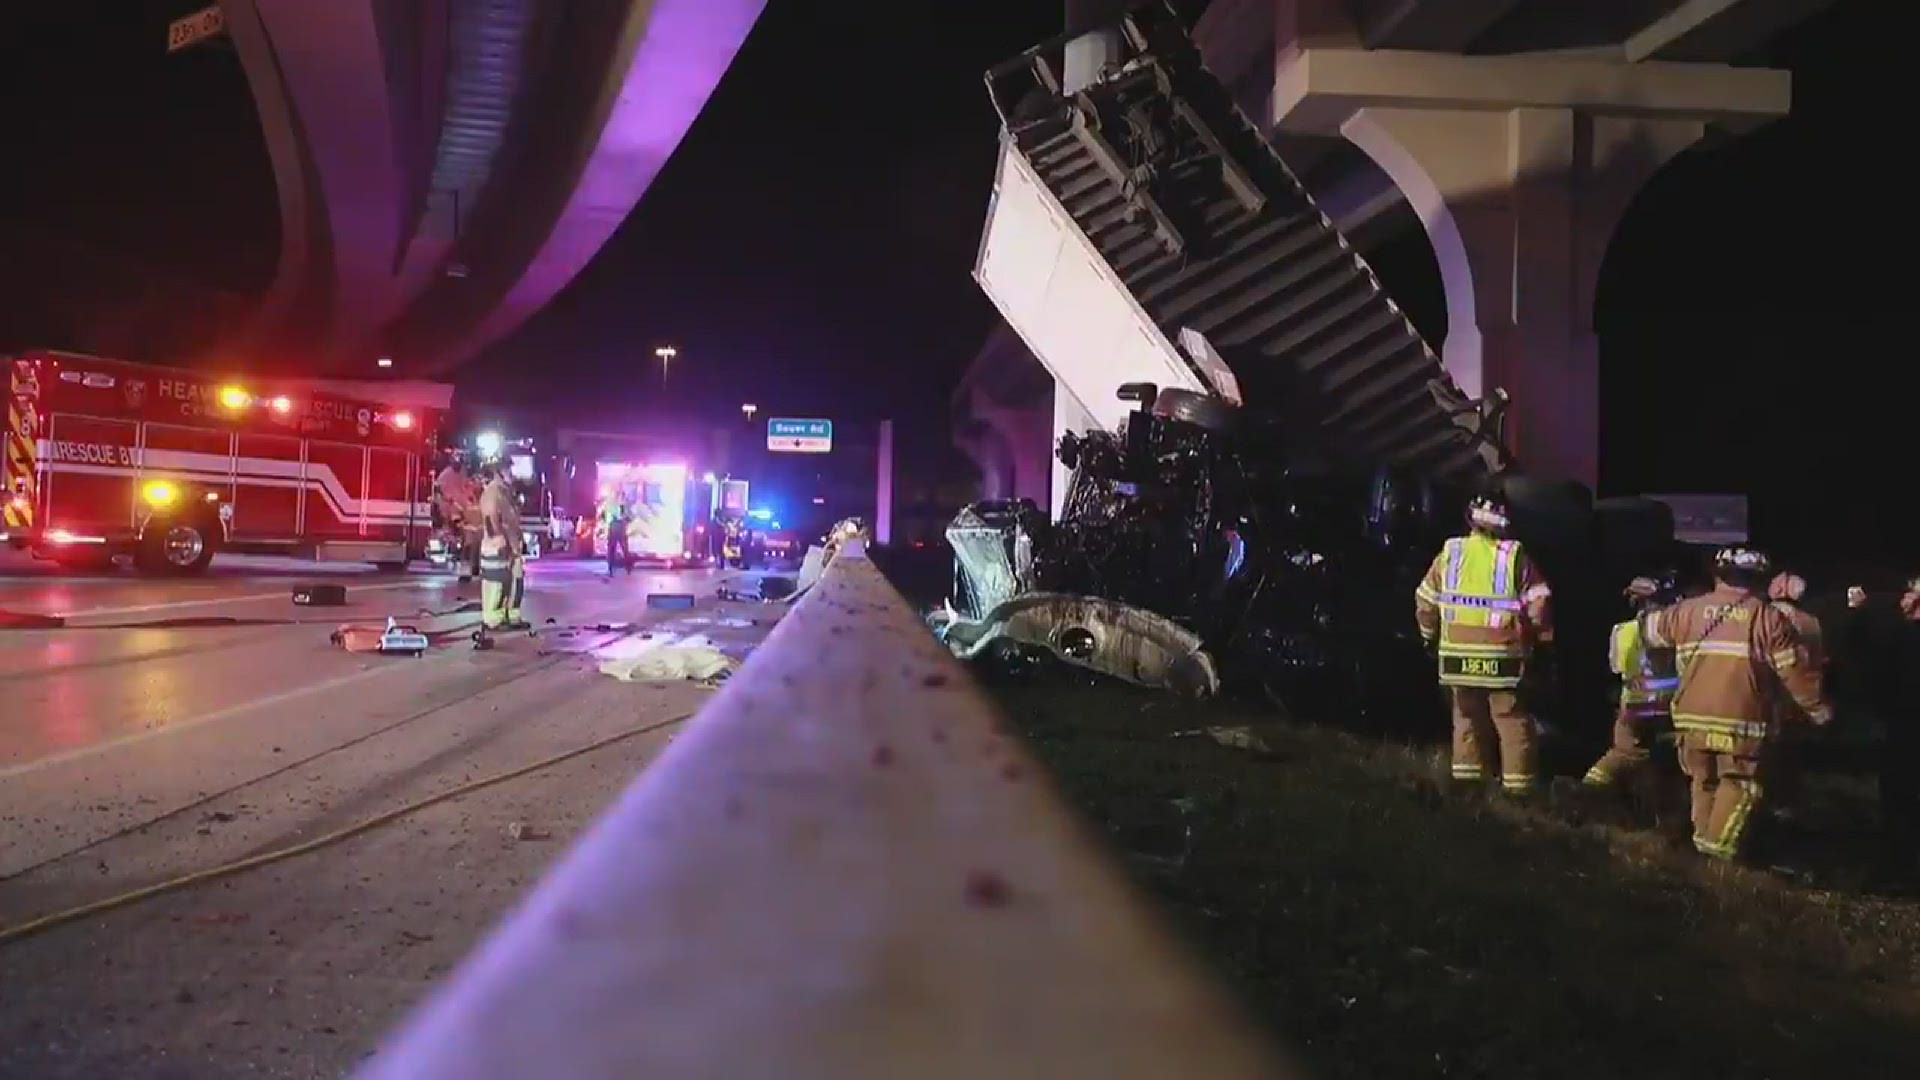 A big rig driver was critically hurt when their vehicle fell from an overpass in the Cypress area early Thursday morning, tweeted the Cy-Fair Fire Department.